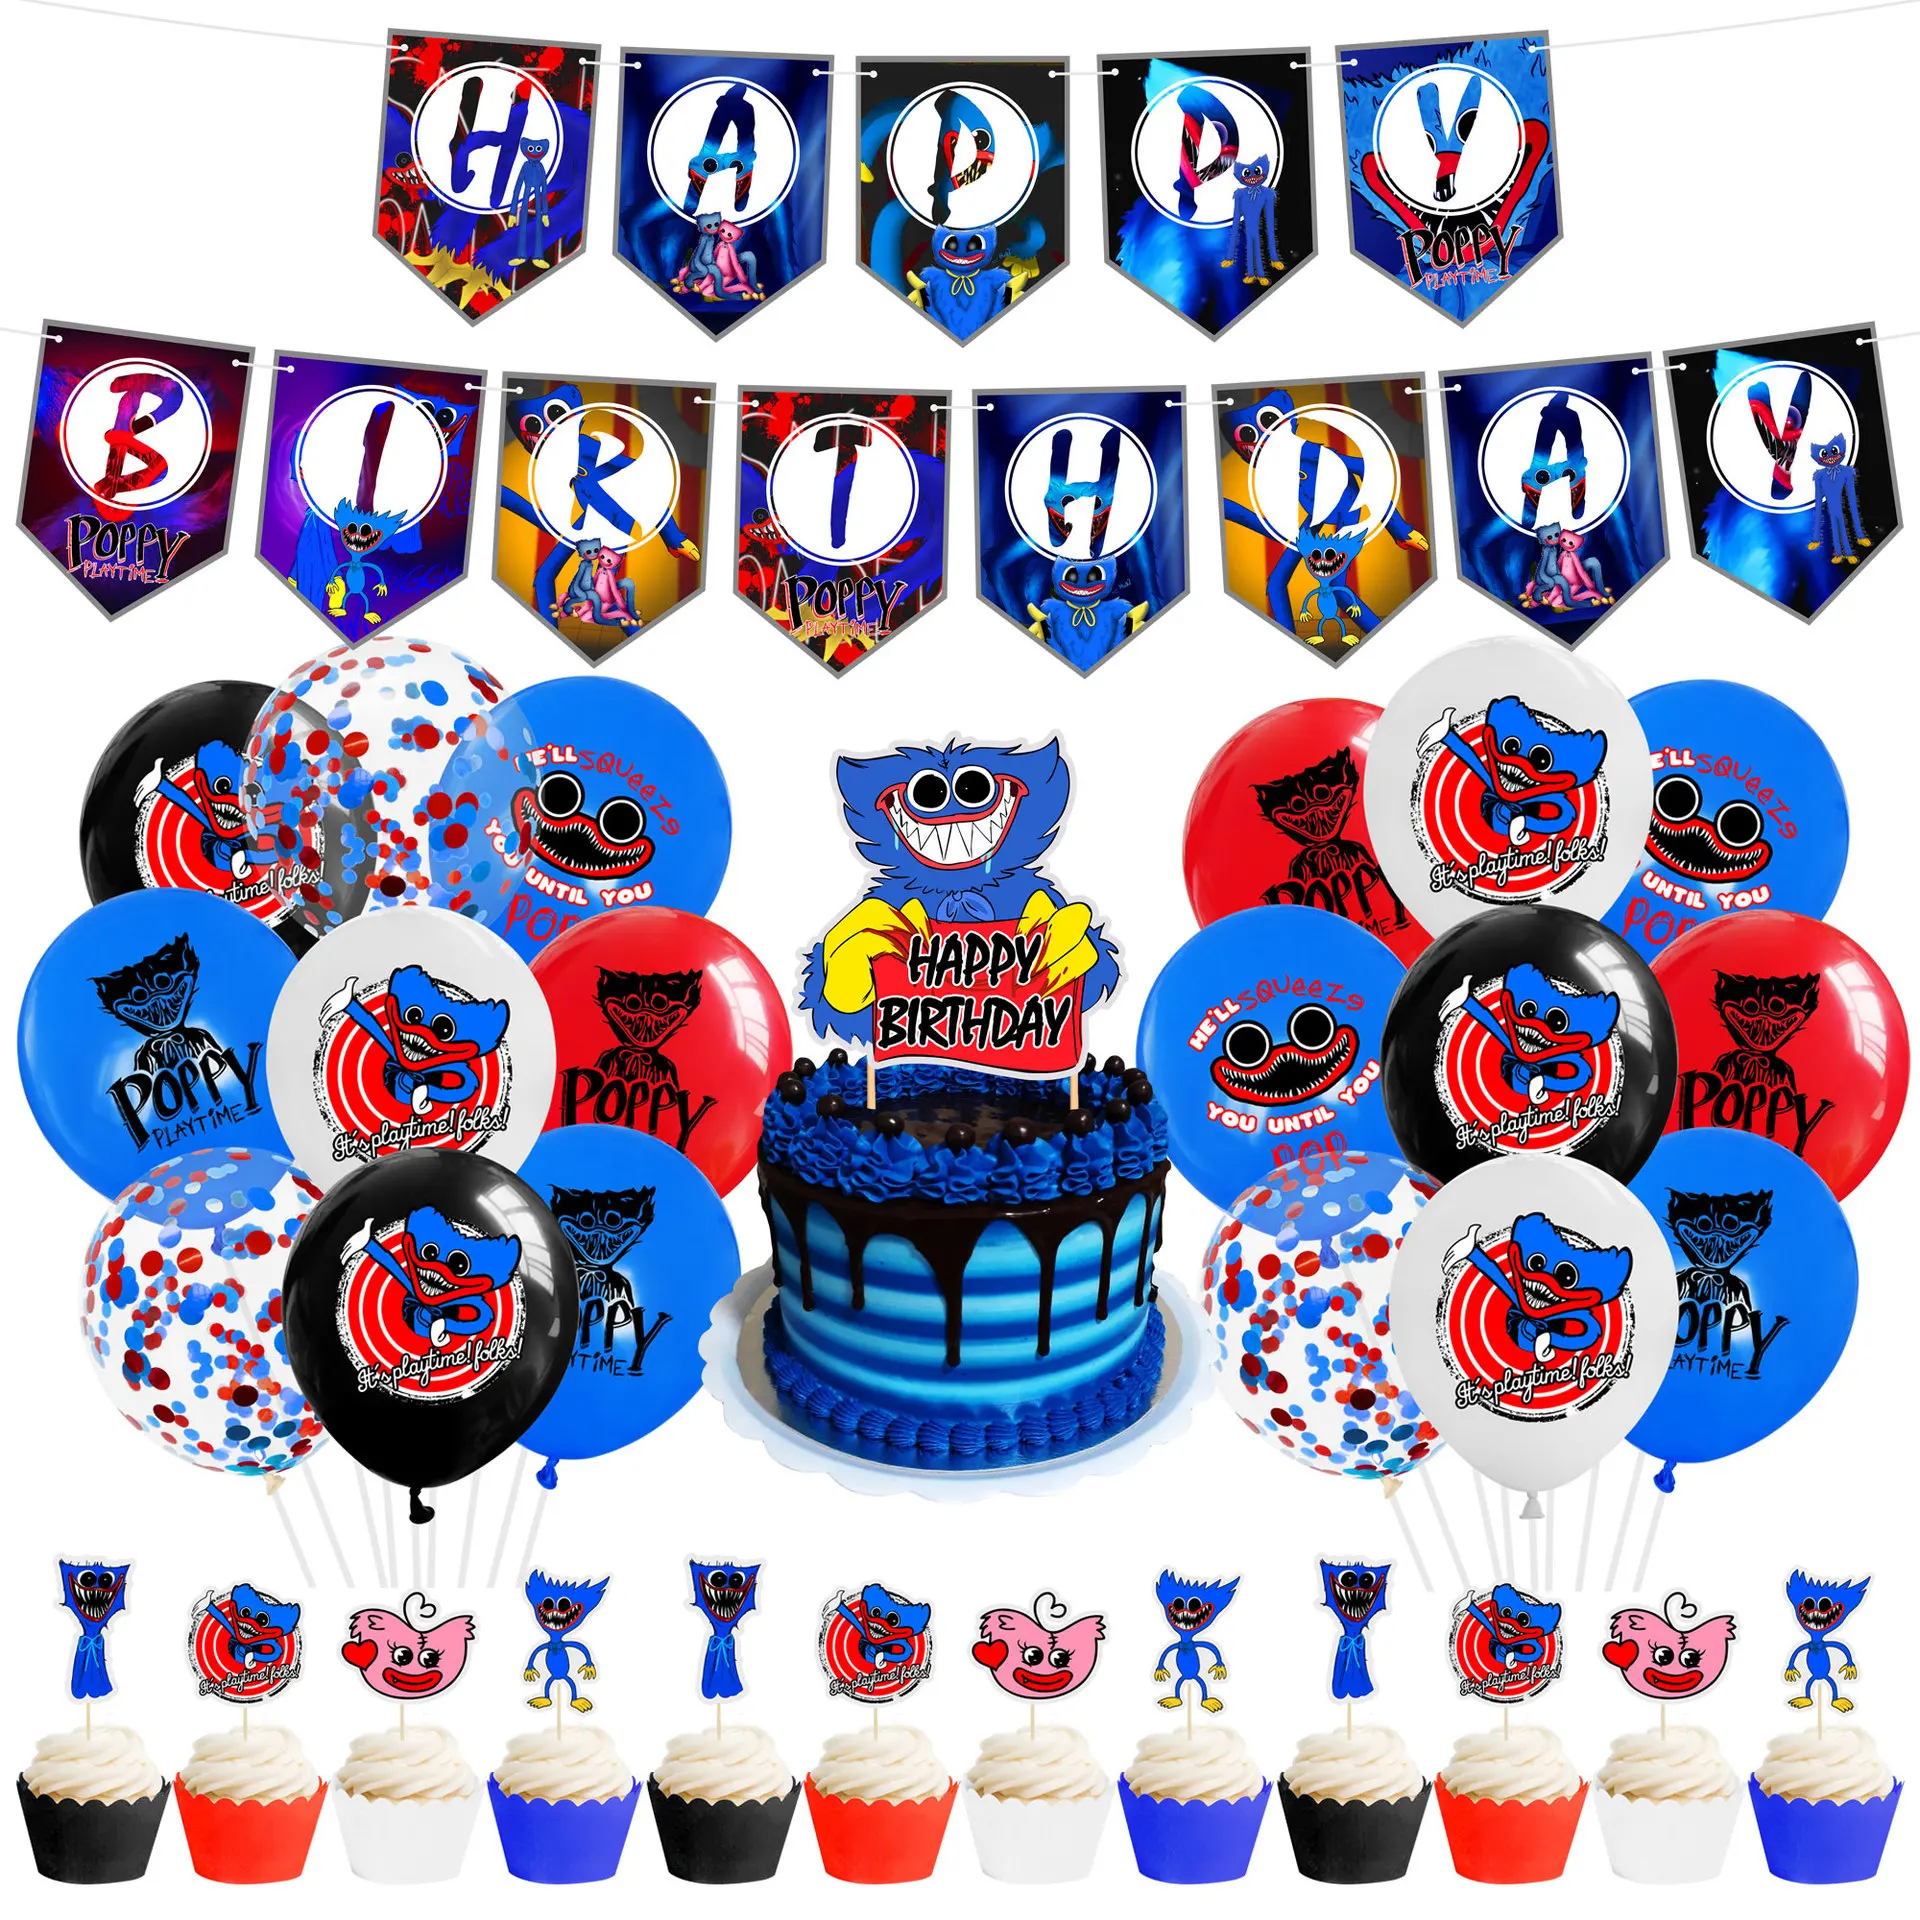 Huggy Wuggy Birthday Decorations Helium Balloons Baking Cake Plug-in Childrens Toy Foil Ball Poppy Playtime Game Party Supplies